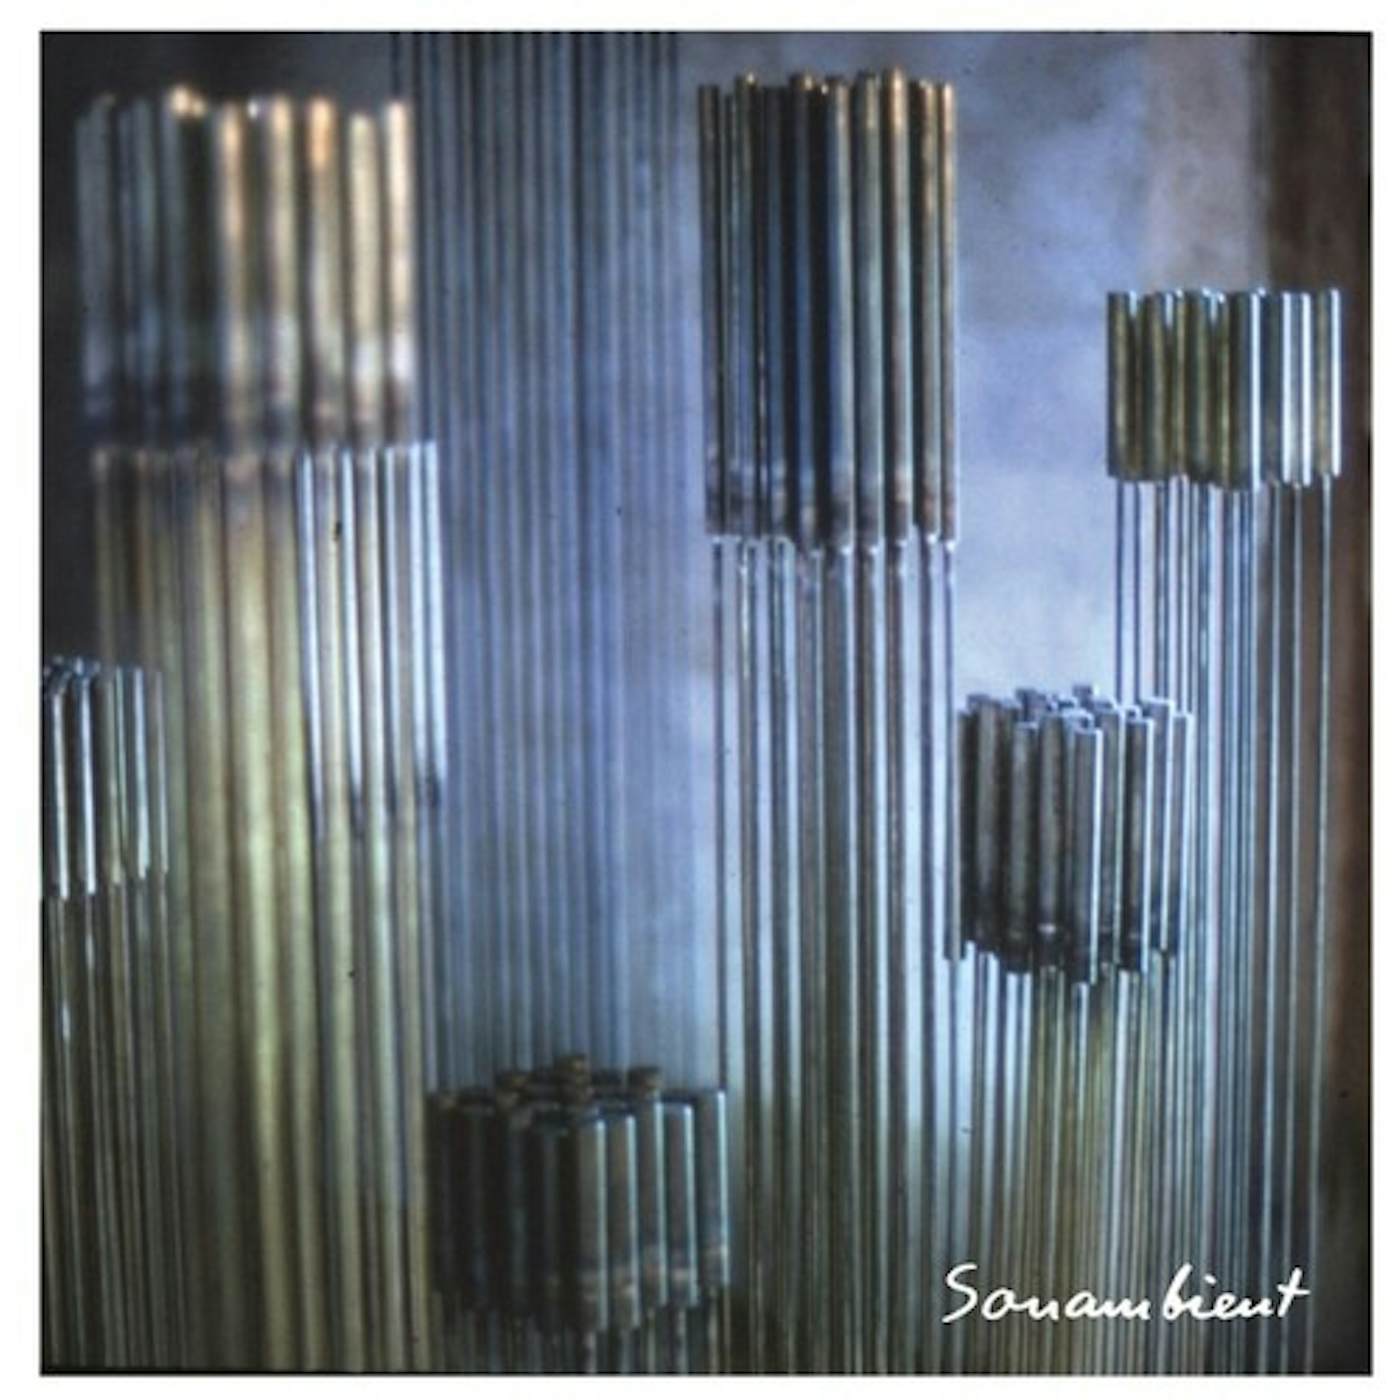 Harry Bertoia HINTS OF THINGS TO COME CD